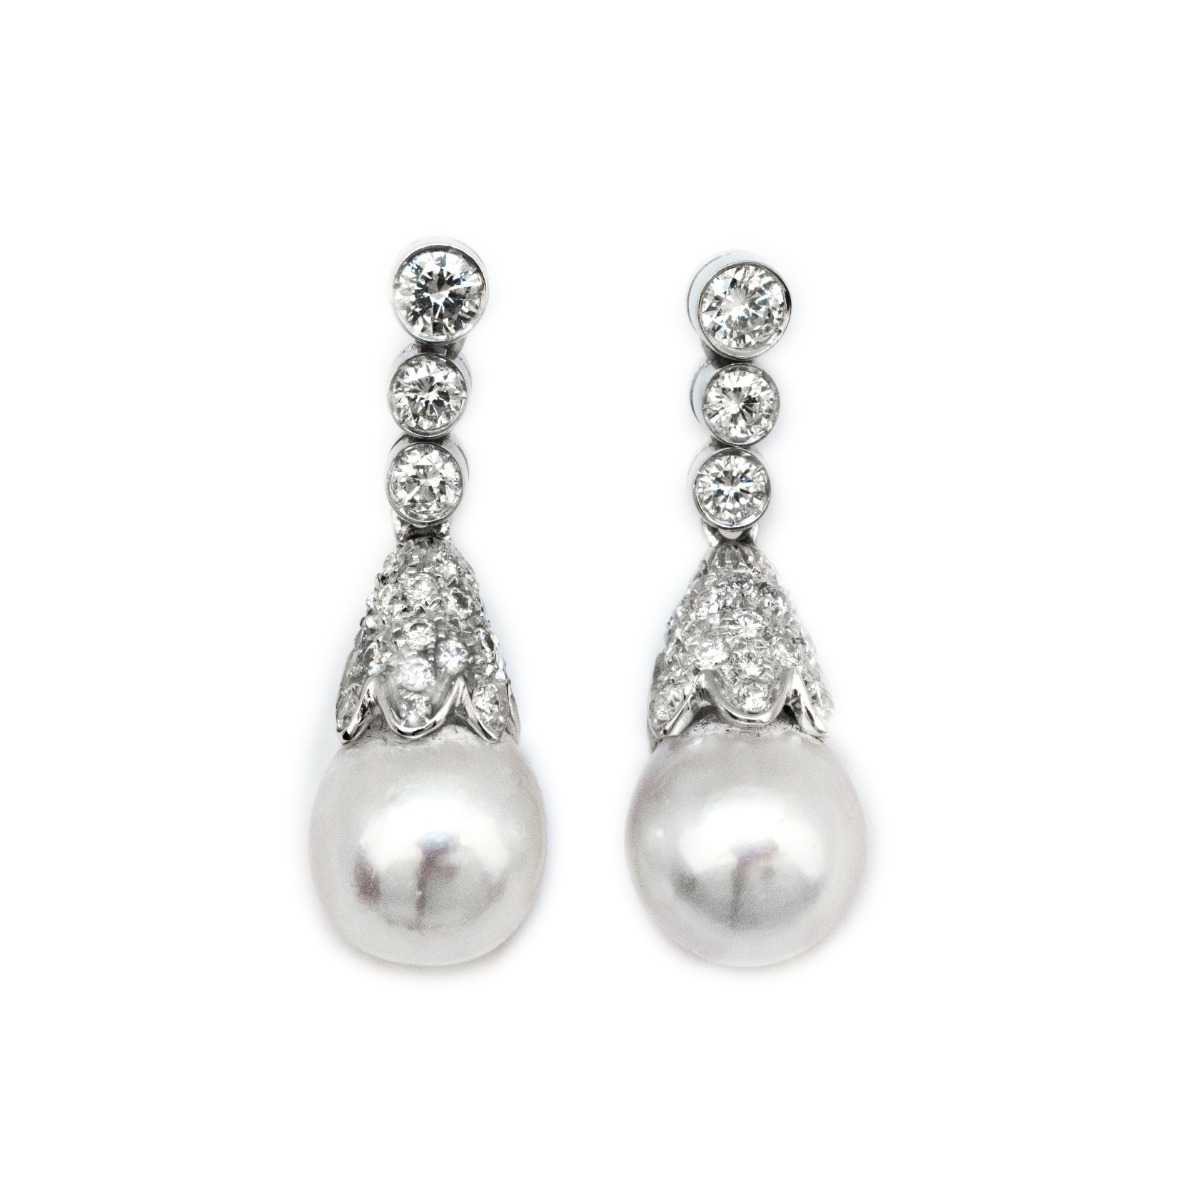 Vintage-Inspired White Pearl Drop Earrings with Diamonds